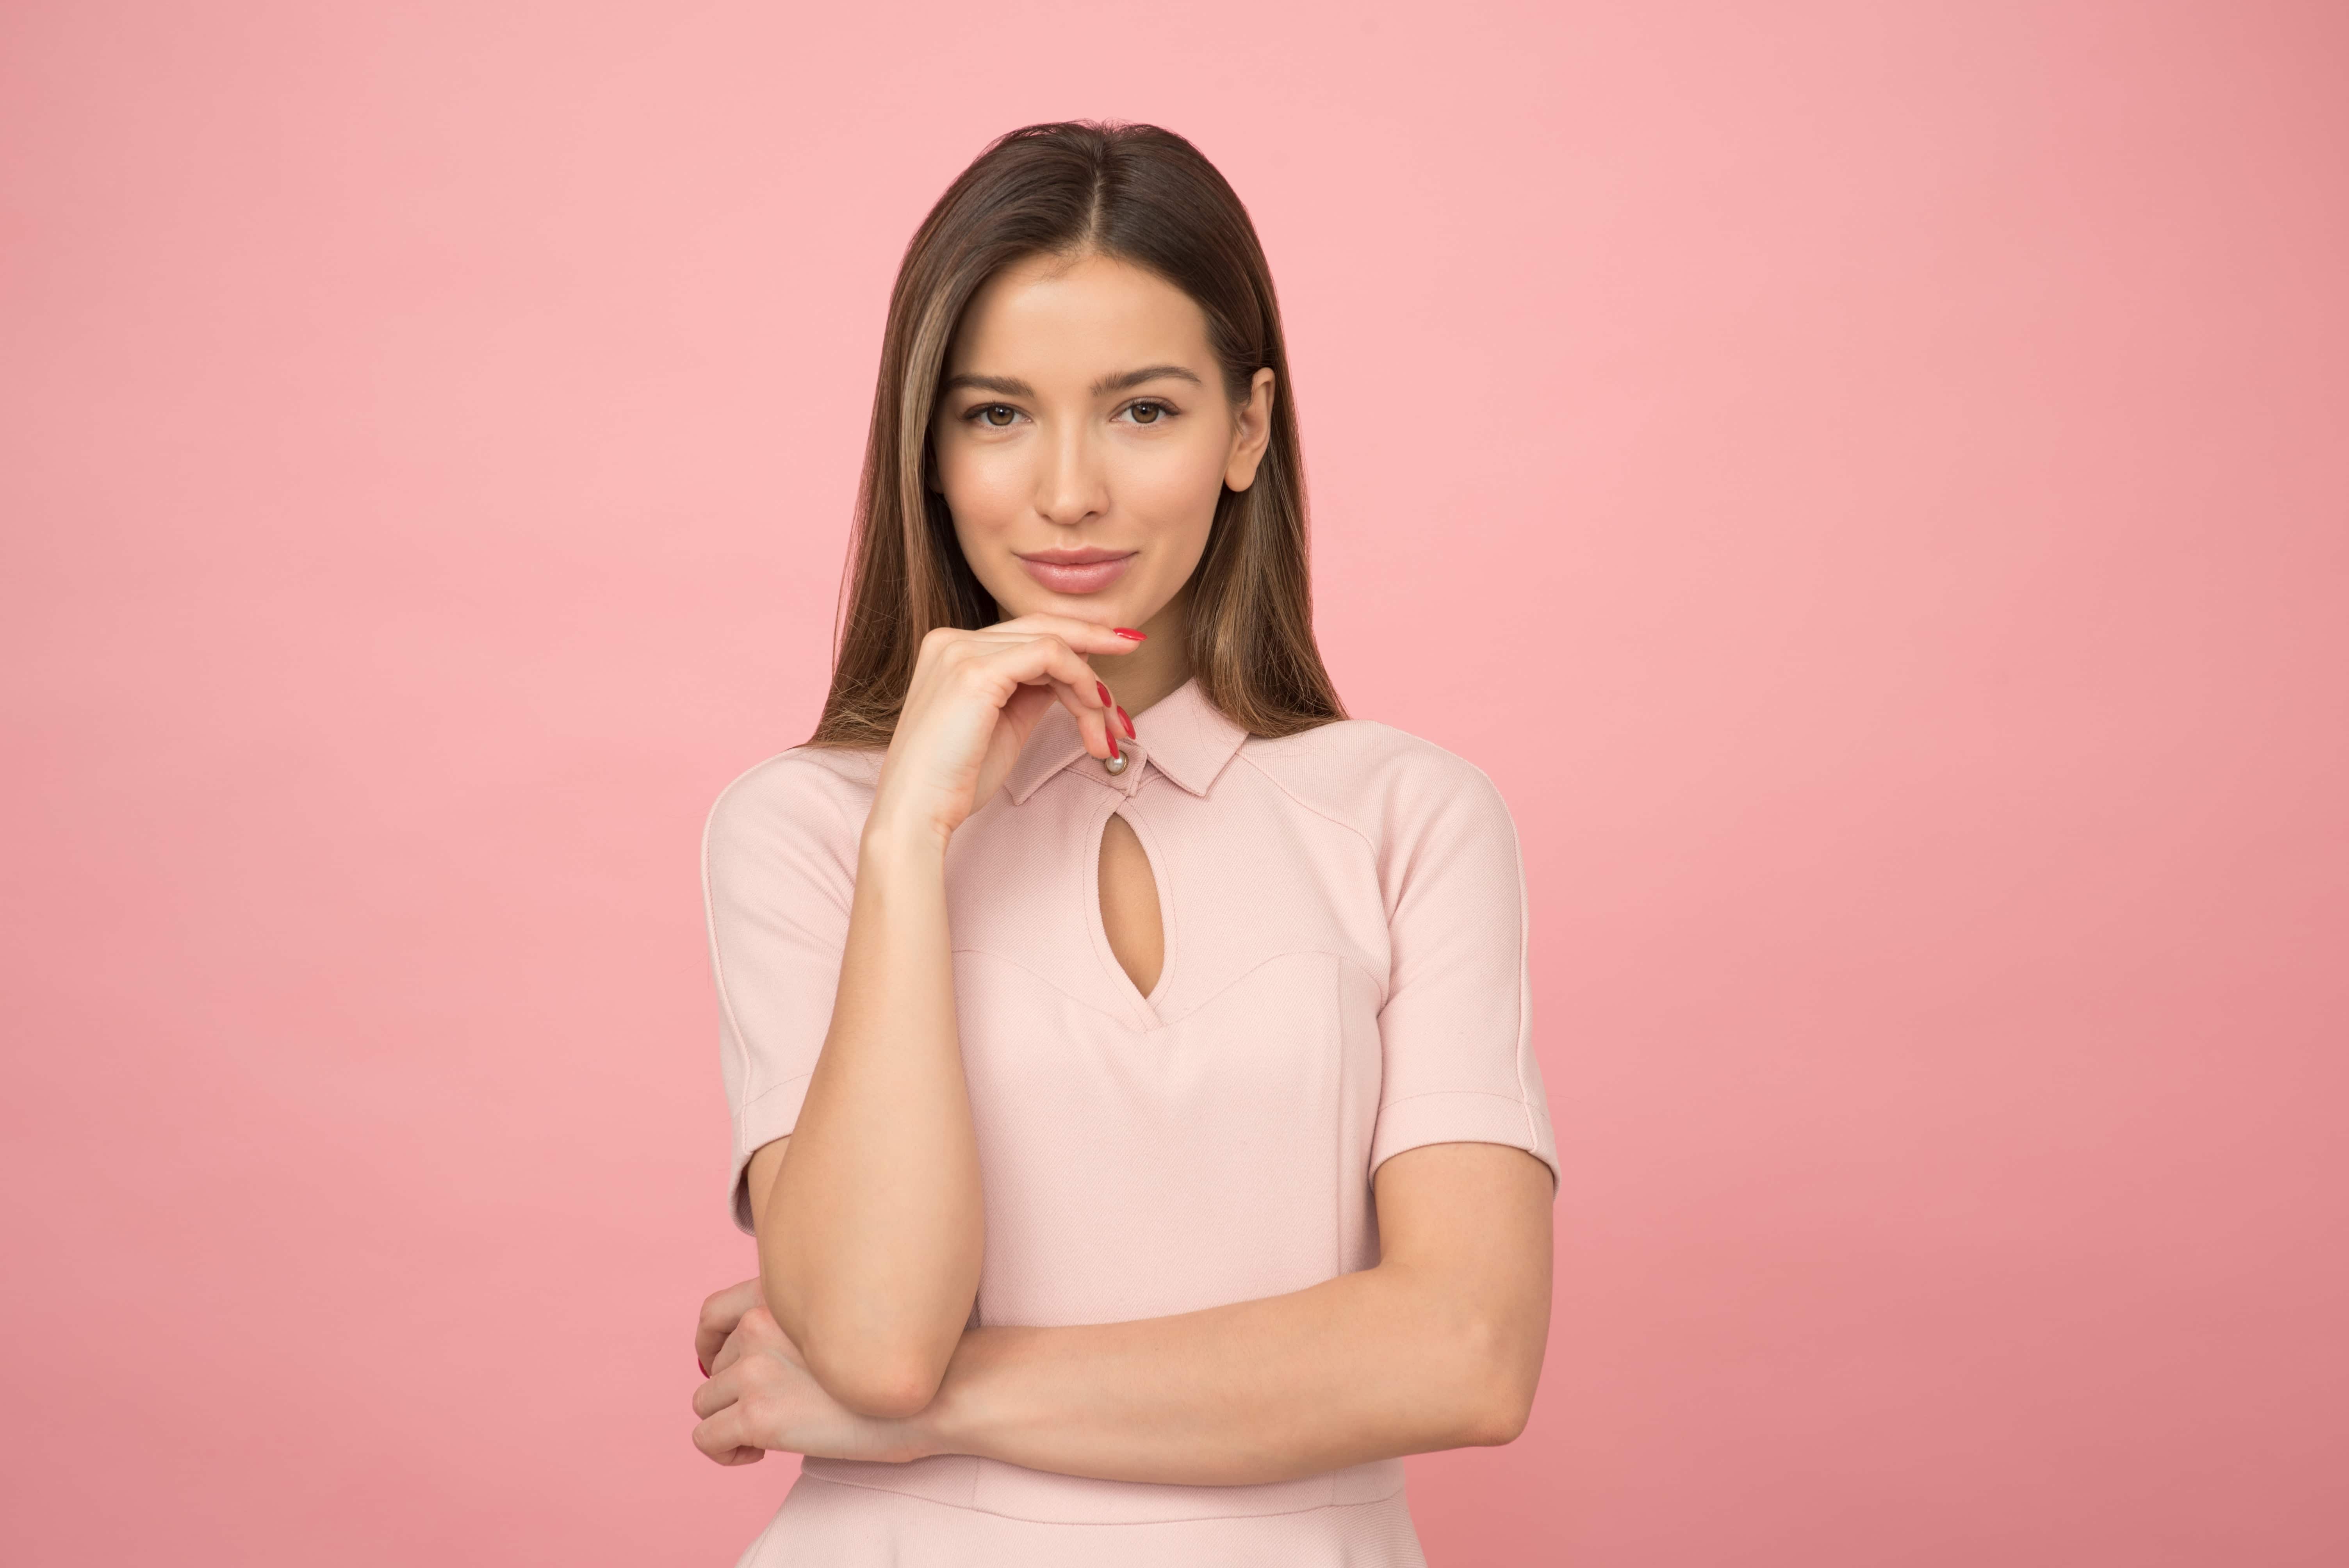 A professional woman stands against a pink background